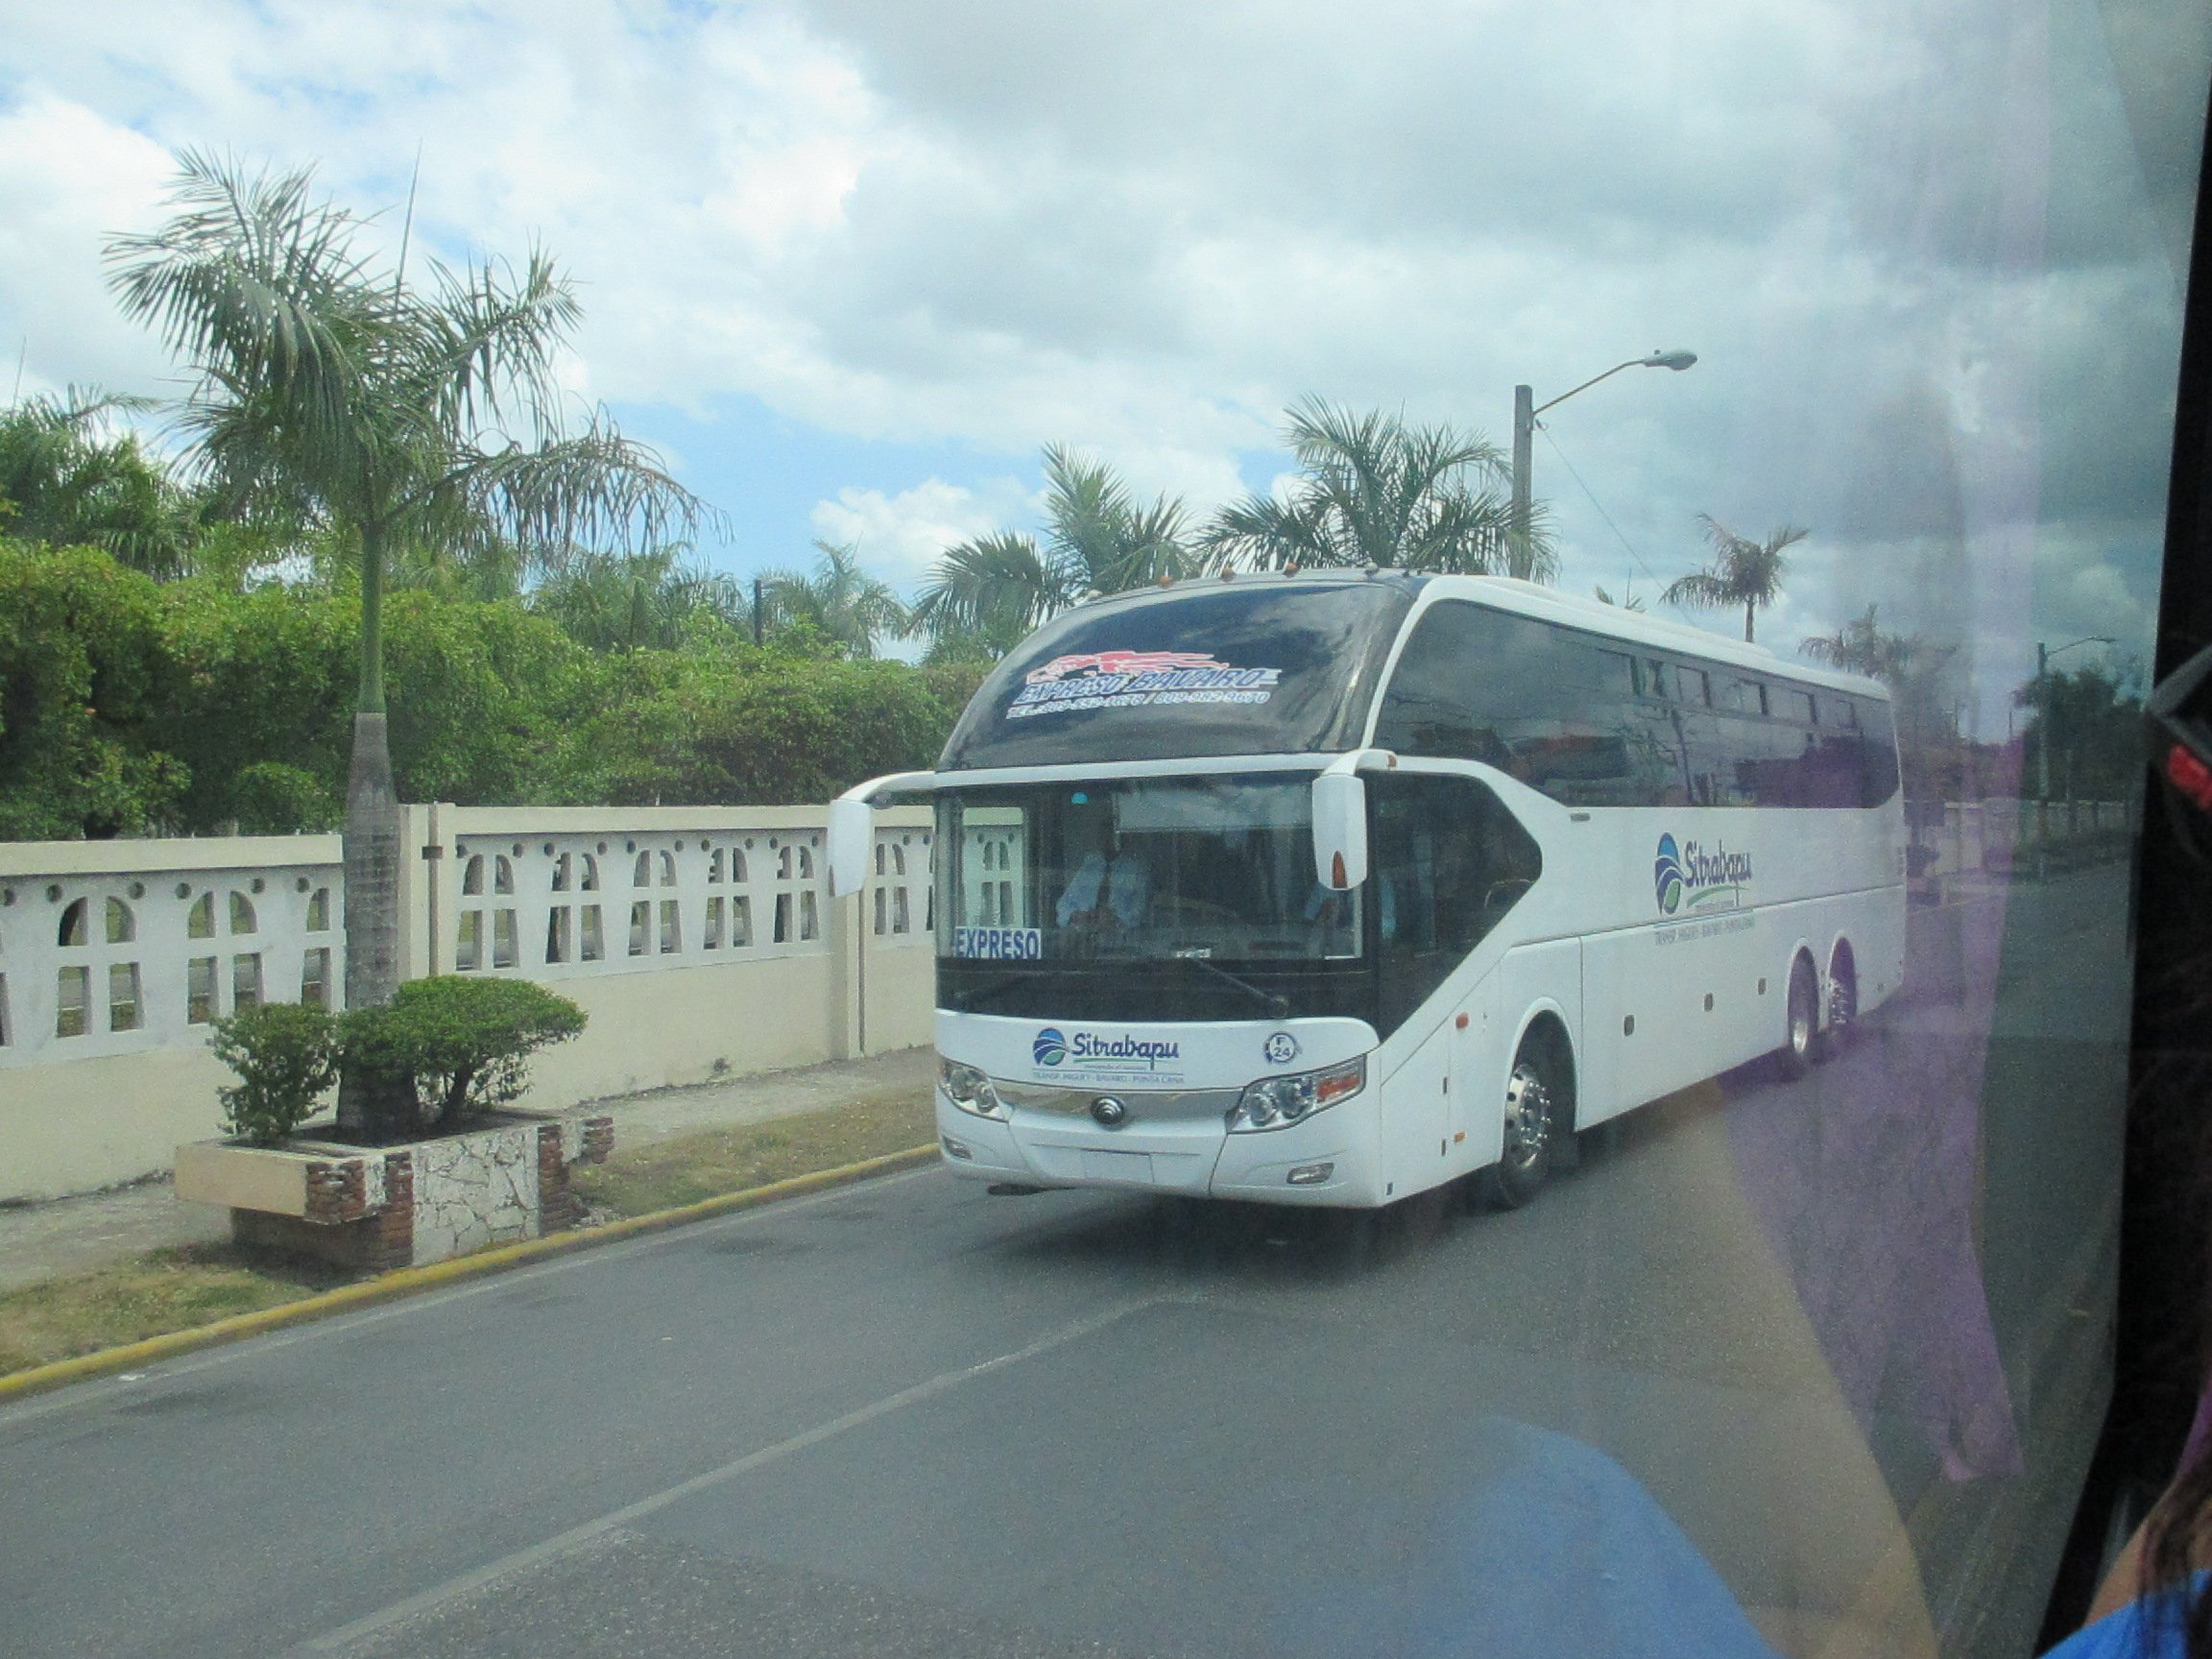 How To Get From Punta Cana Airport to Barahona - All Possible Ways, cheapest way from Punta Cana to Barahona, Punta Cana to Barahona, Punta Cana to Barahona bus, Punta Cana airport to Barahona, Bavaro Bus Expreso Punta Cana to Barahona